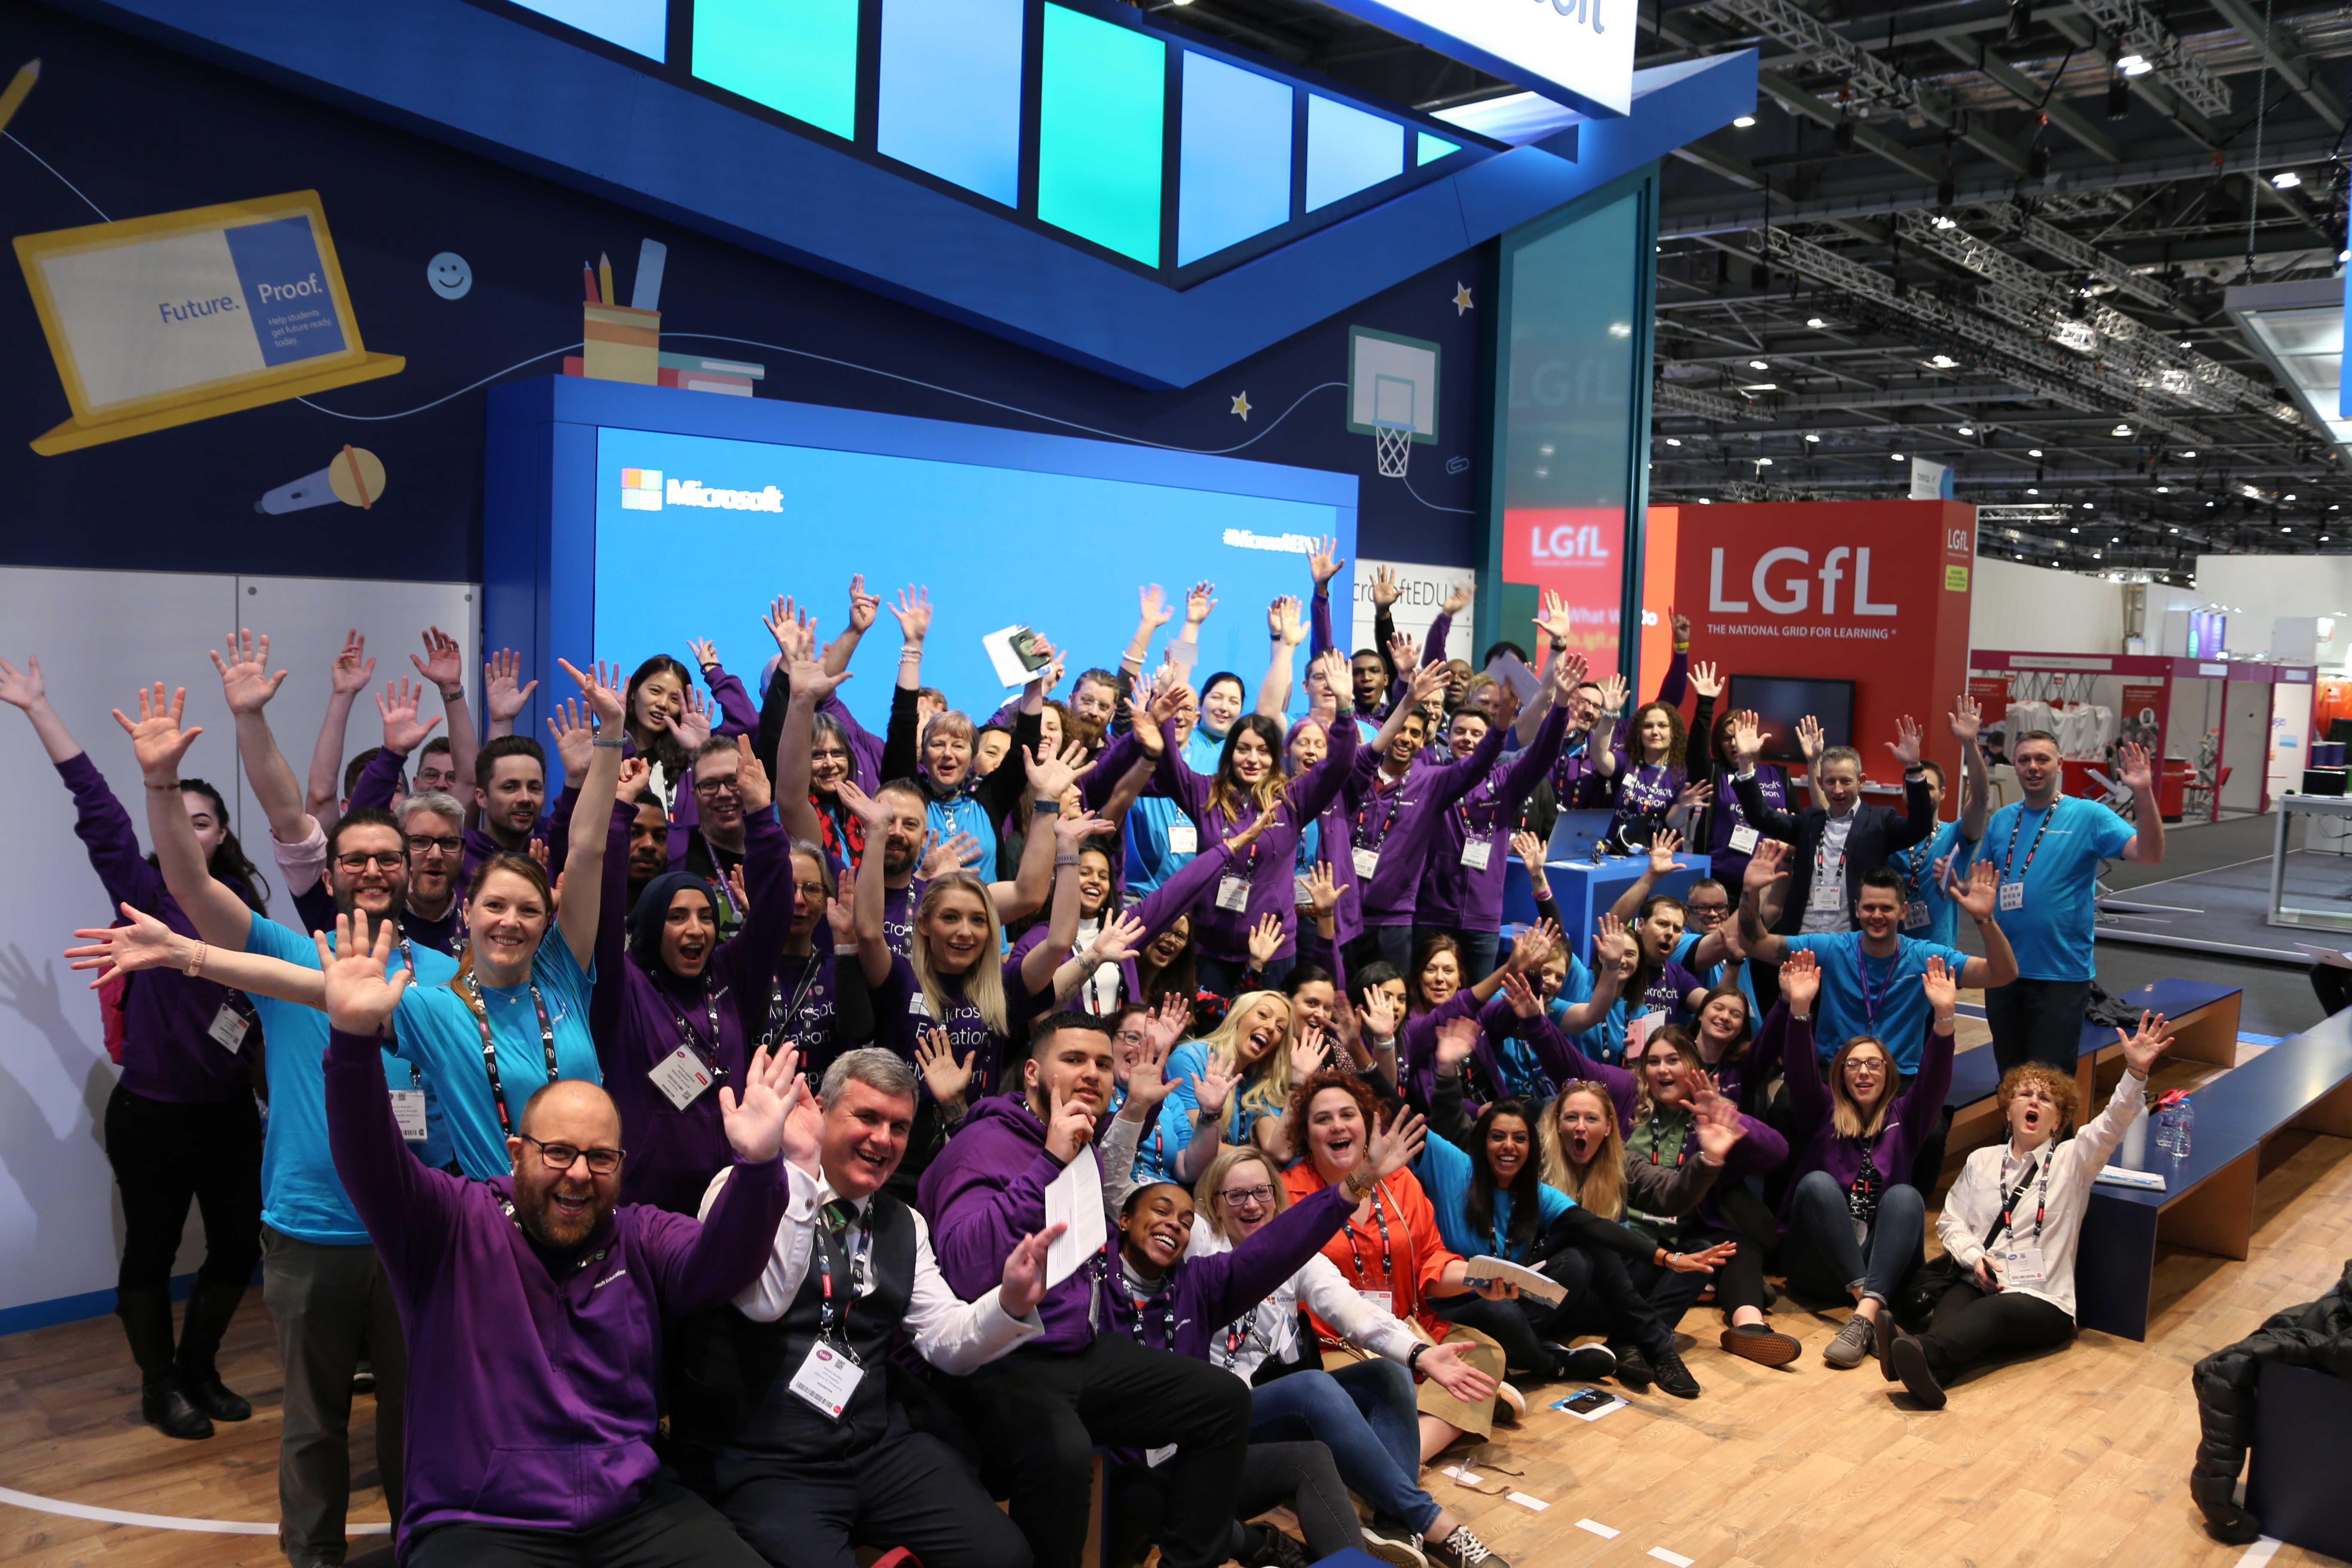 Microsoft staff cheer on their stand at Bett